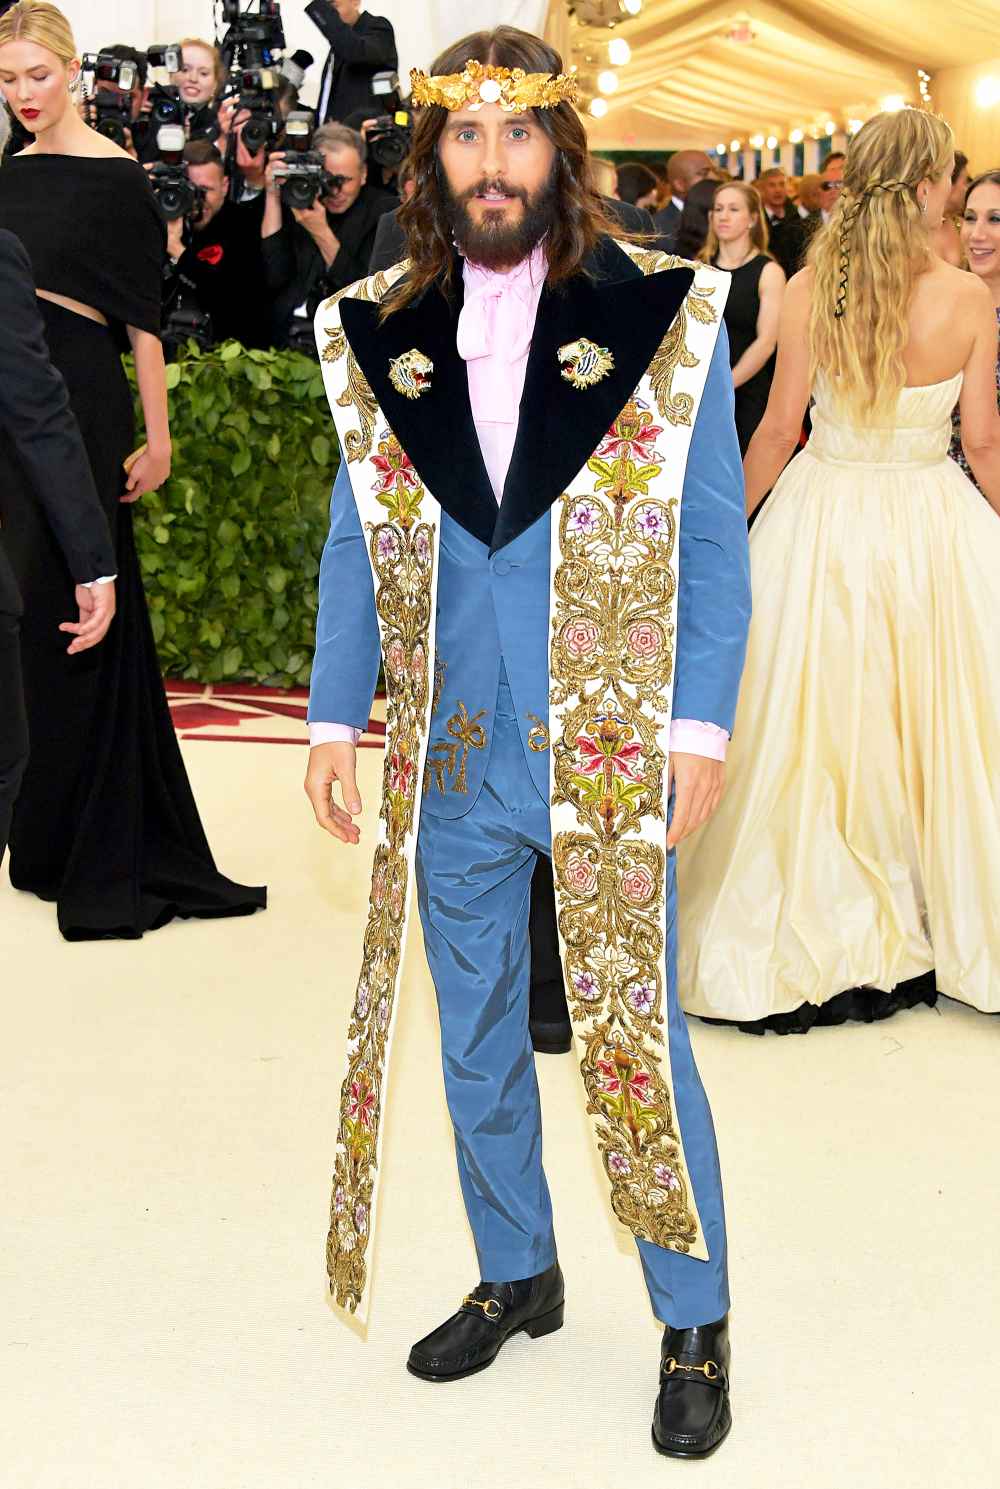 Jared Leto attends the Heavenly Bodies: Fashion & The Catholic Imagination Costume Institute Gala at The Metropolitan Museum of Art on May 7, 2018 in New York City.